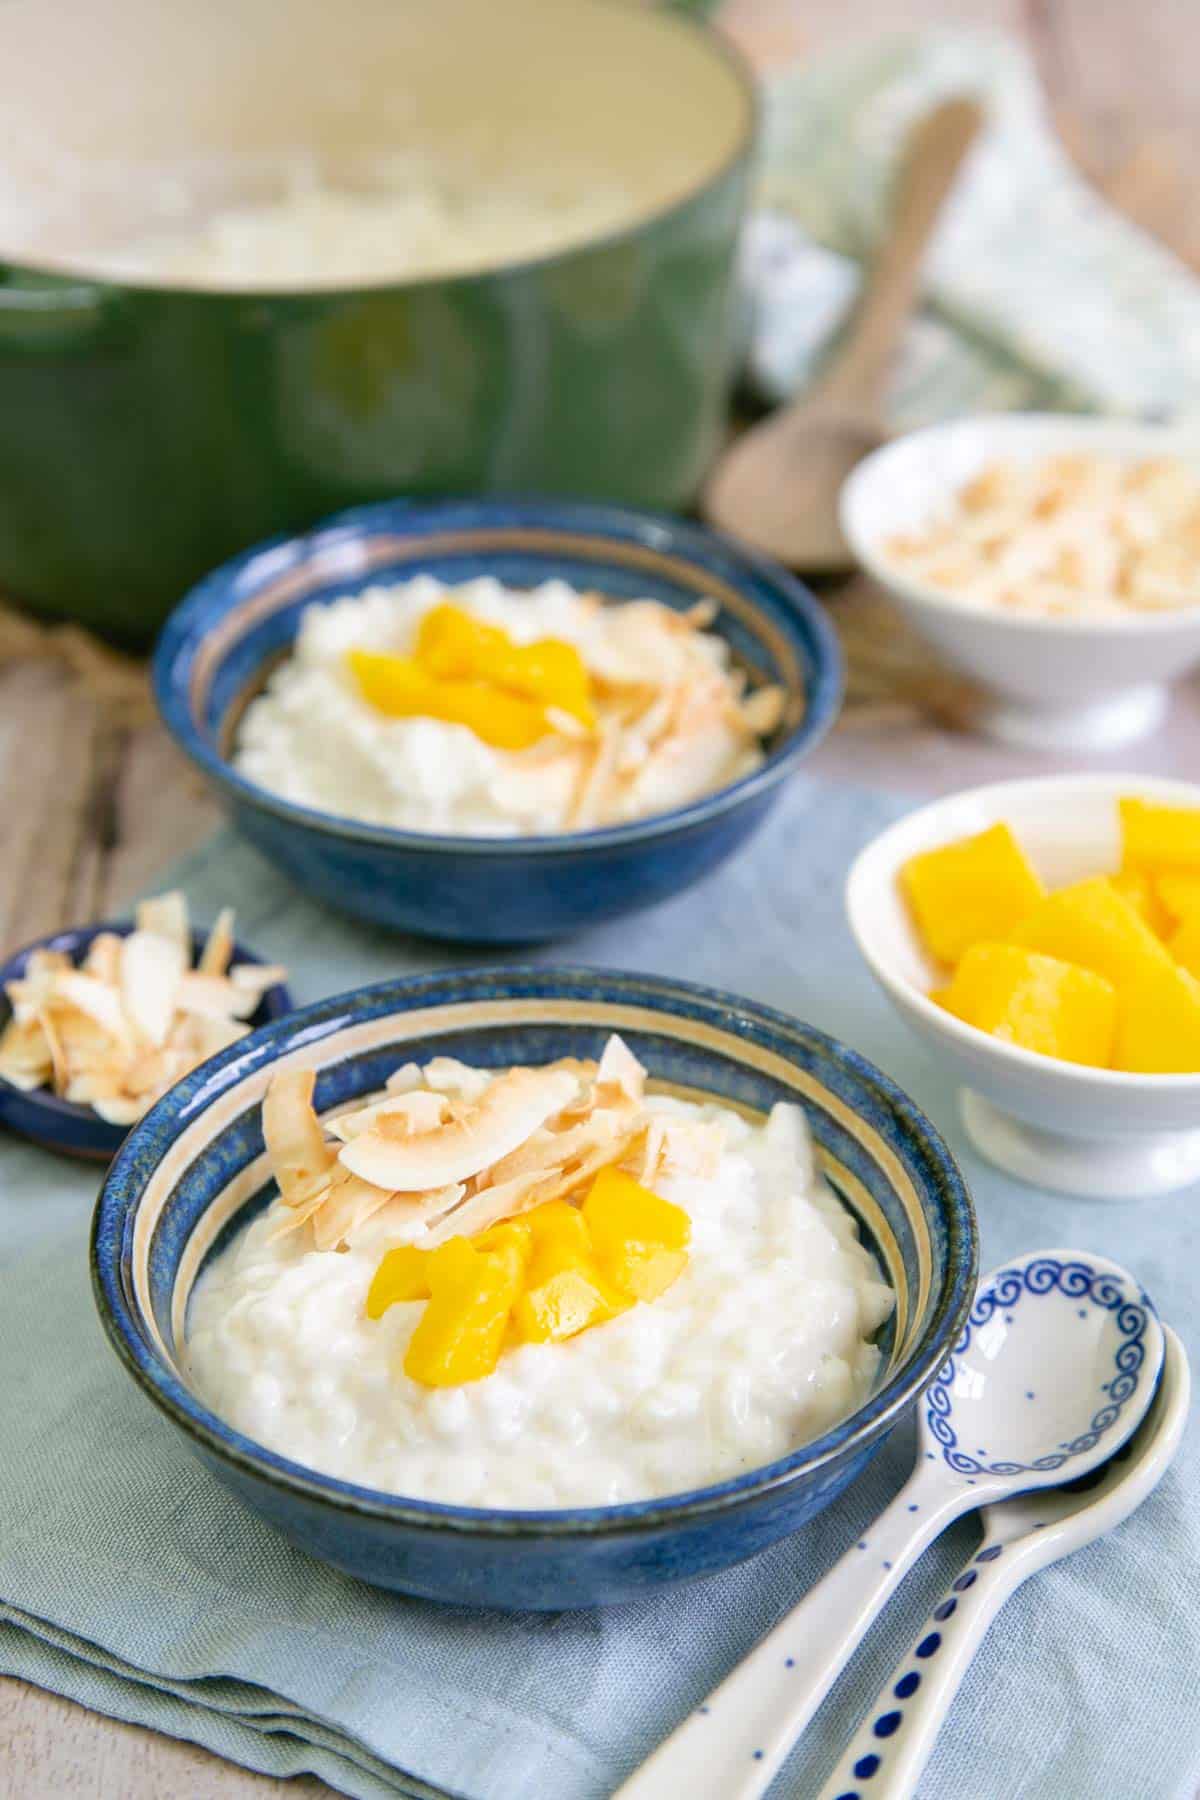 Luxurious bowls of coconut rice pudding topped with fresh mango and toasted coconut shavings.